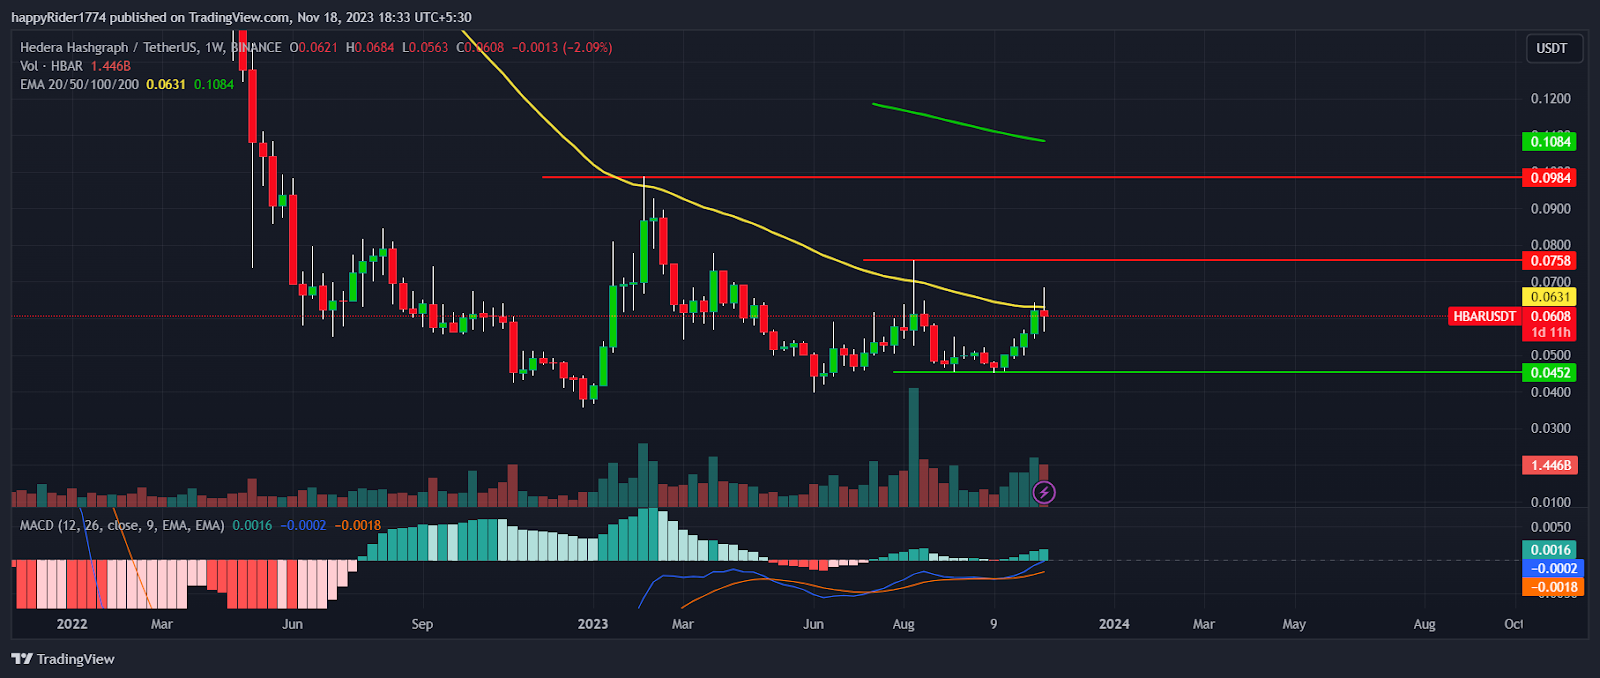 HBAR Price Prediction 2024: Calm Before Storm in Hedera Crypto?